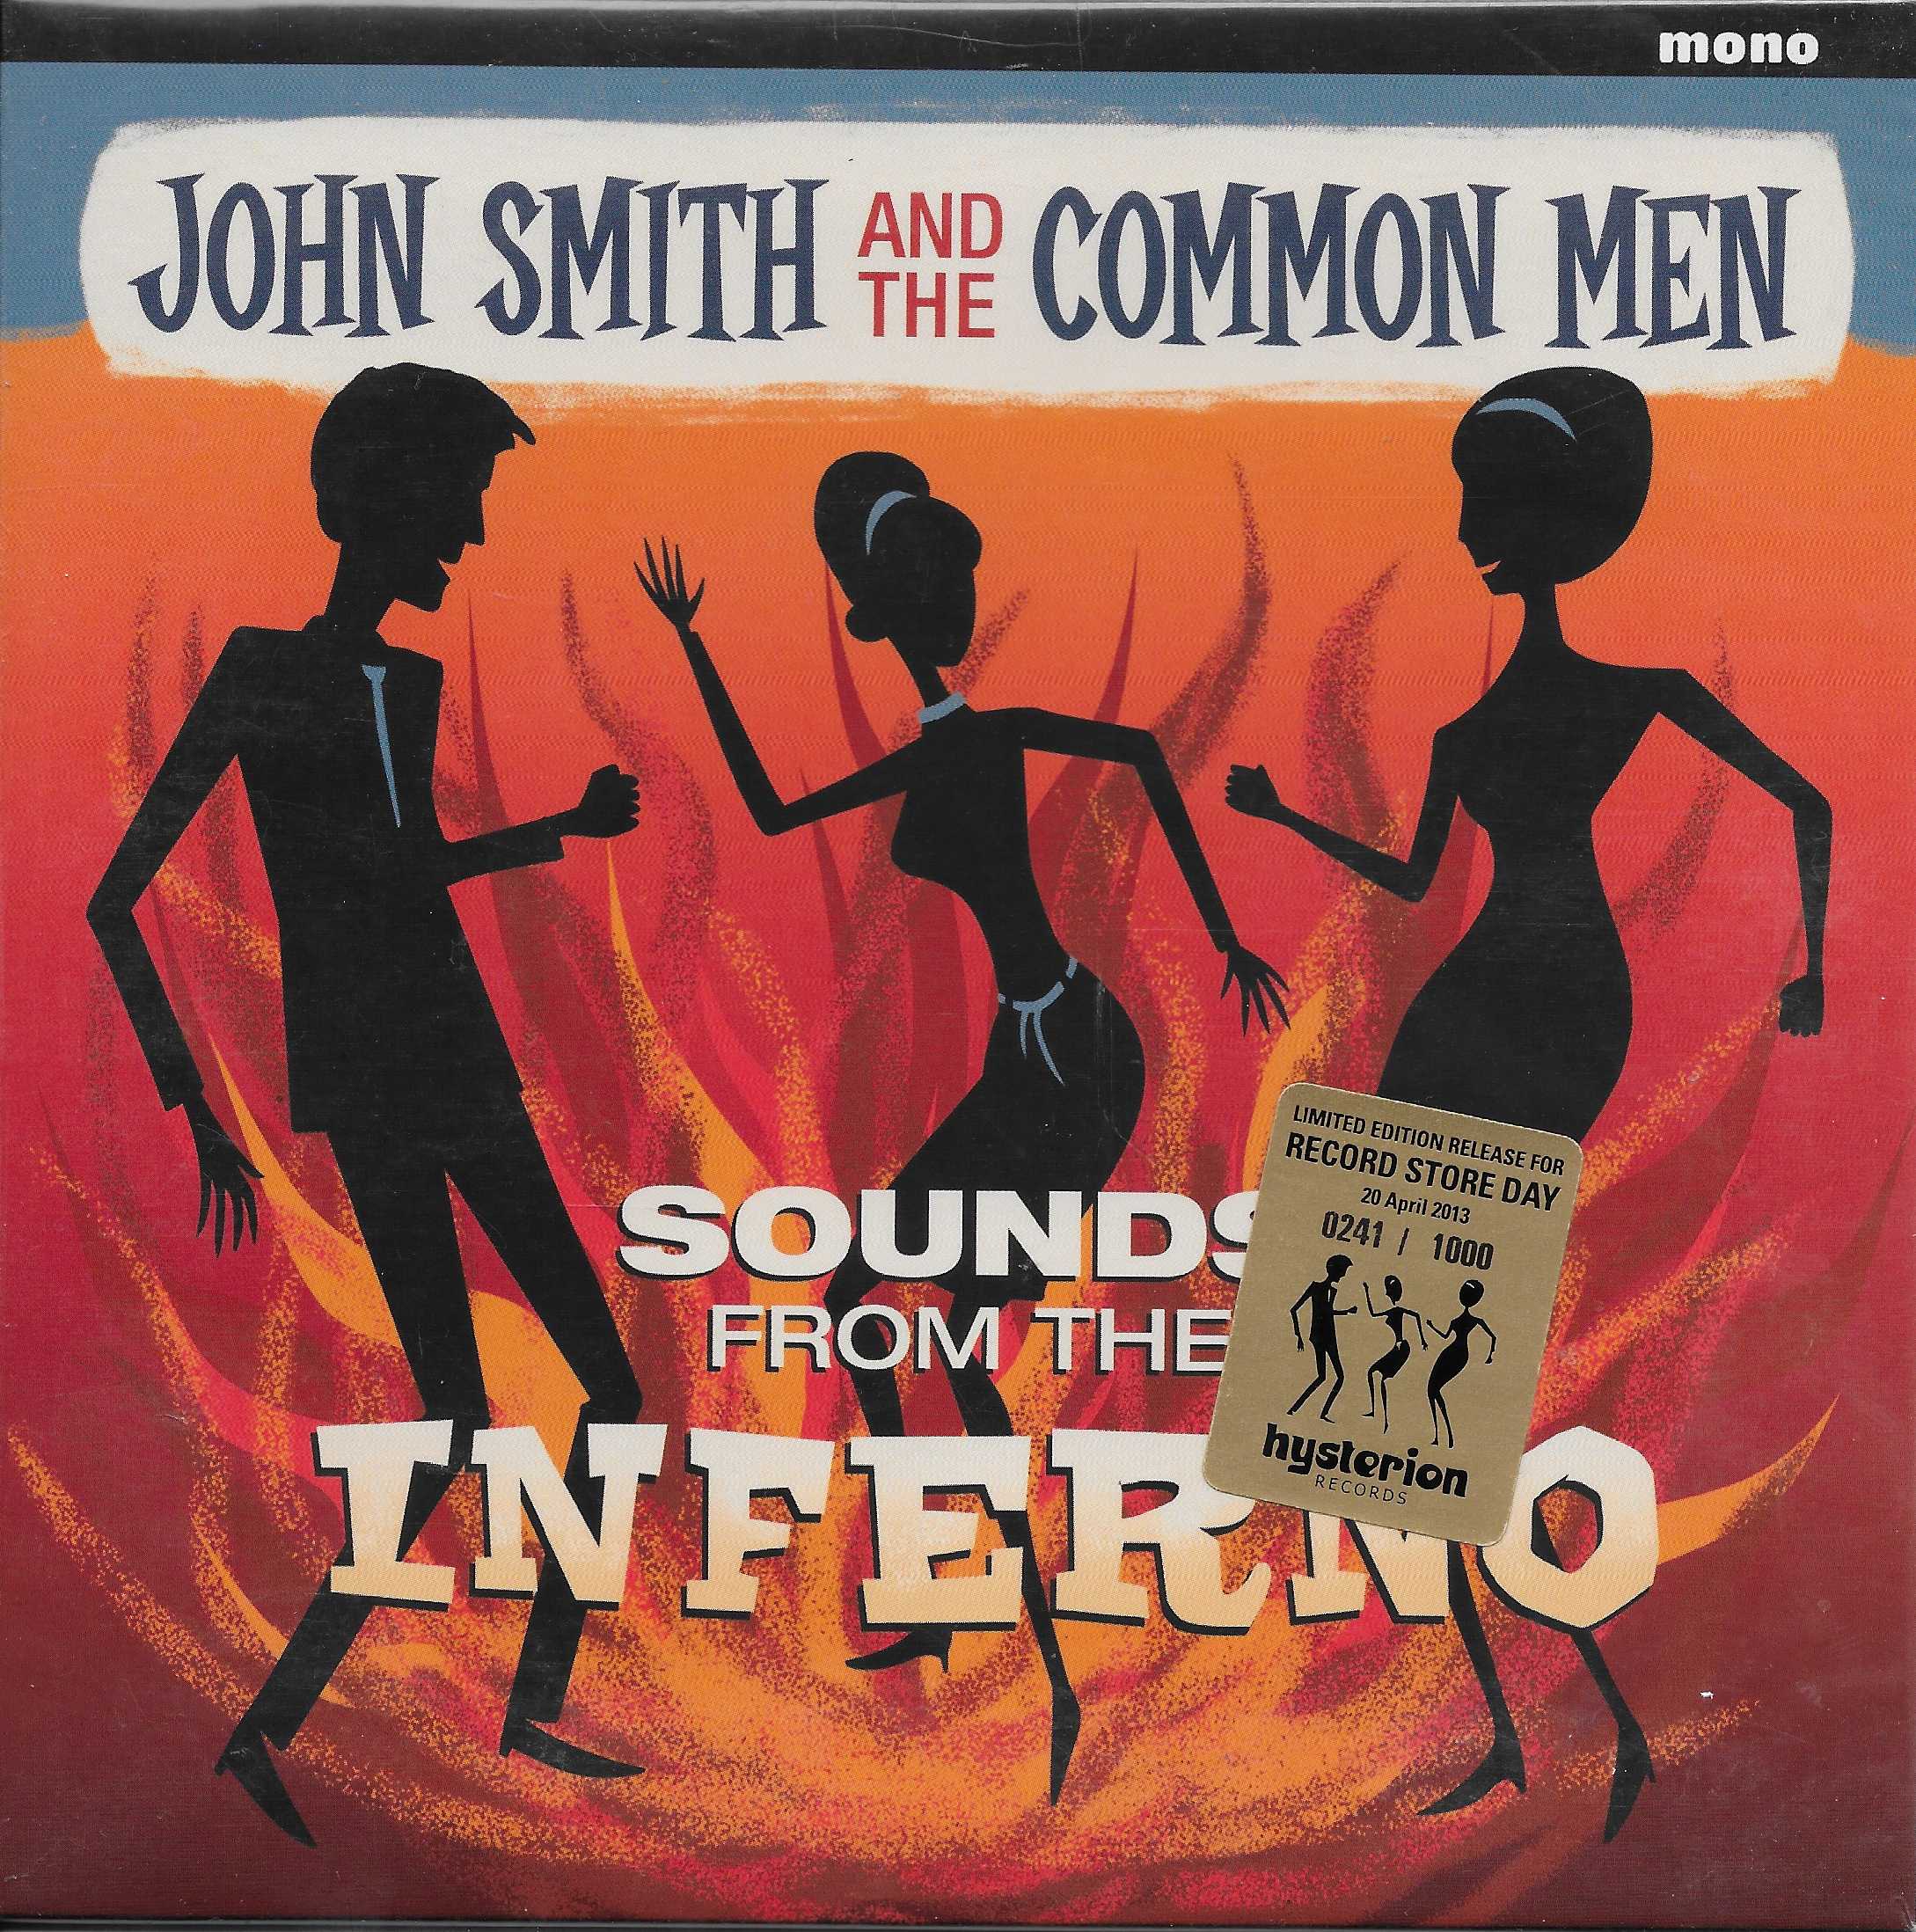 Picture of HYS 001 Sounds from the inferno - Limited edition - Record Store Day 2013 by artist John Smith and the Common Men from the BBC singles - Records and Tapes library